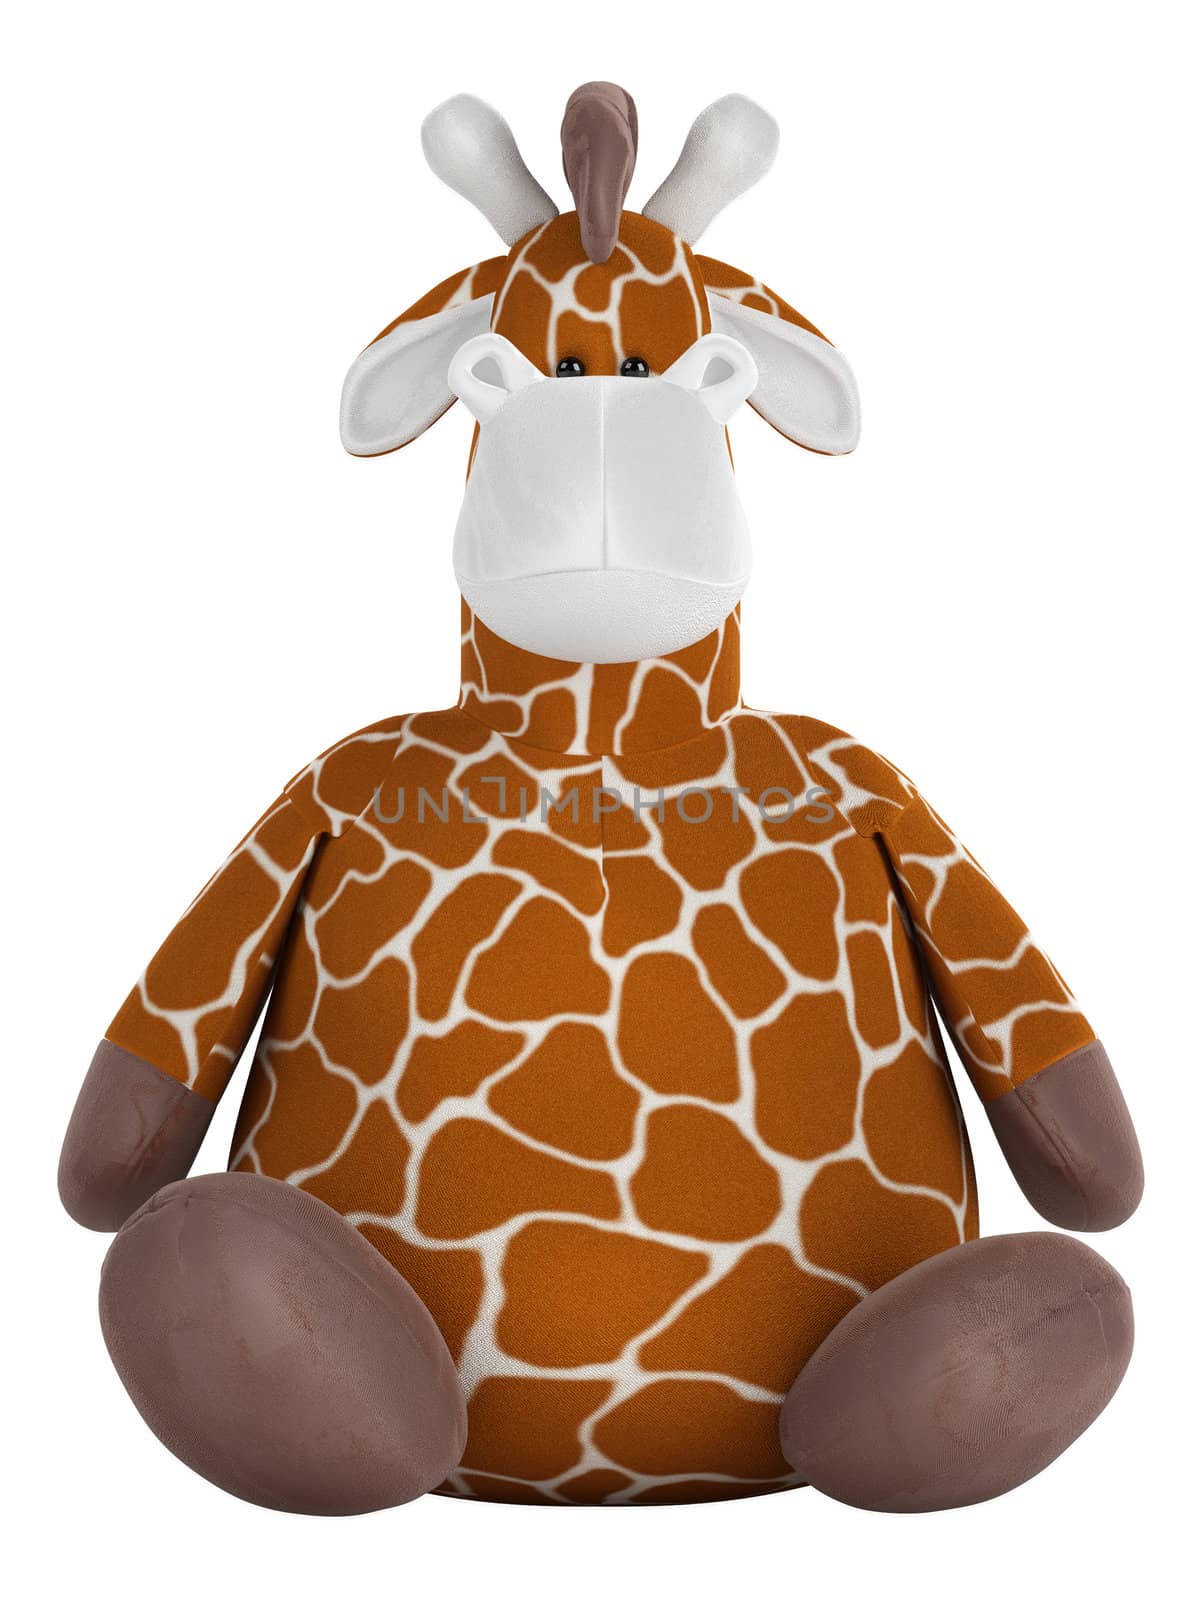 Adorable fat cuddly stuffed giraffe with a spotted pattern on its coat sitting on the floor isolated on white